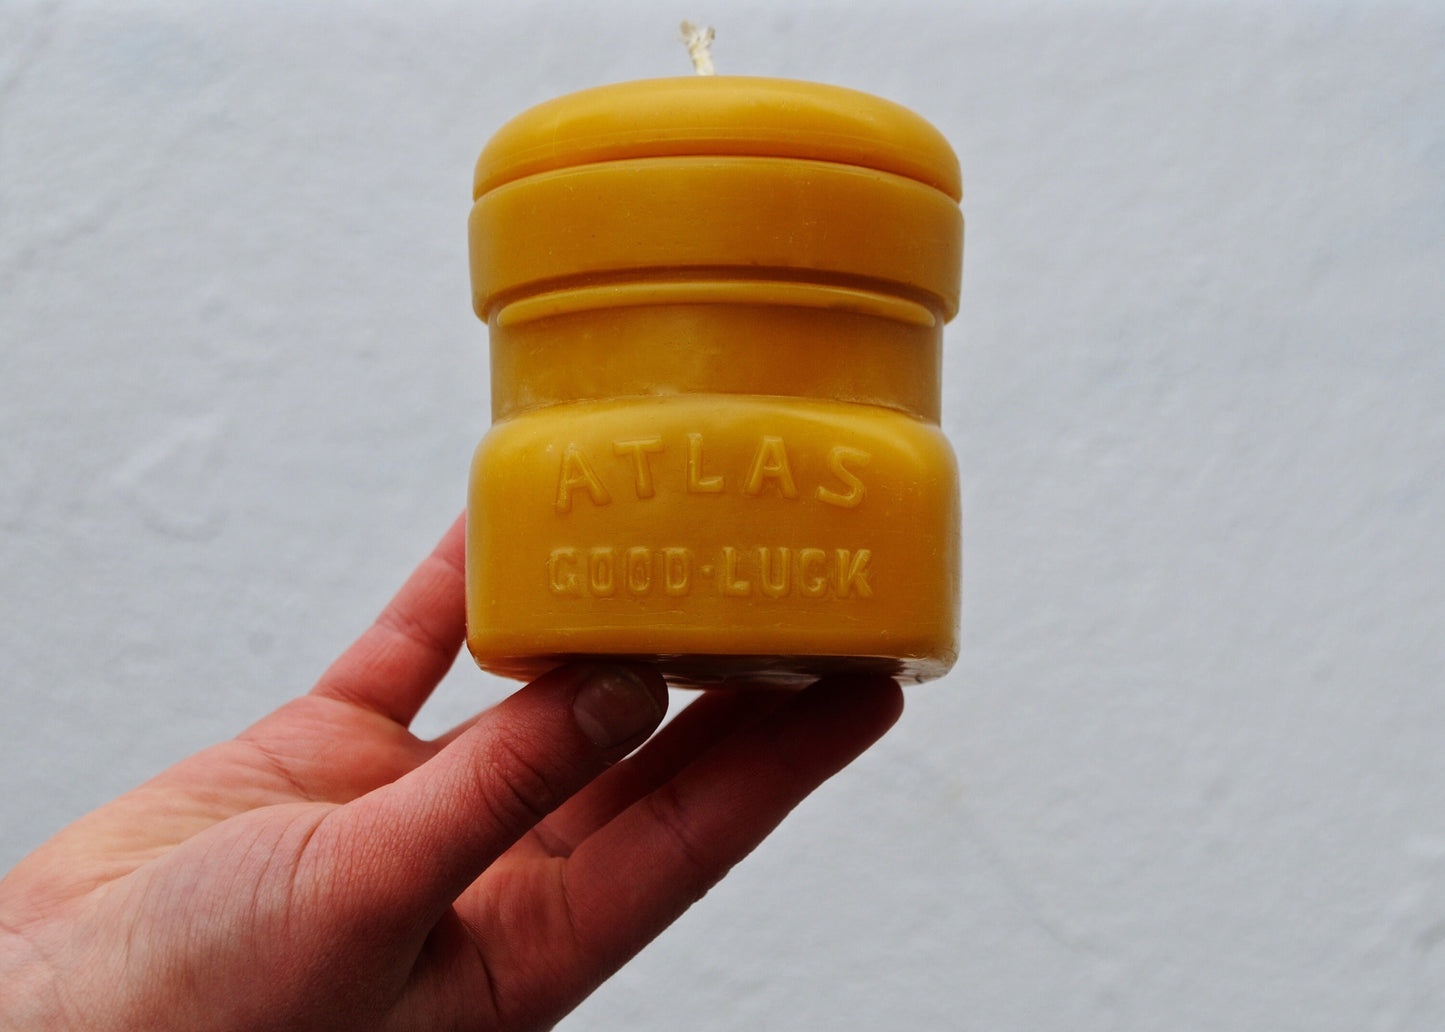 Good Luck Antique Bottle Candle in 100% Beeswax // Burnable Bottle Candle, Beeswax Candle, Pure Beeswax, Handmade in Canada